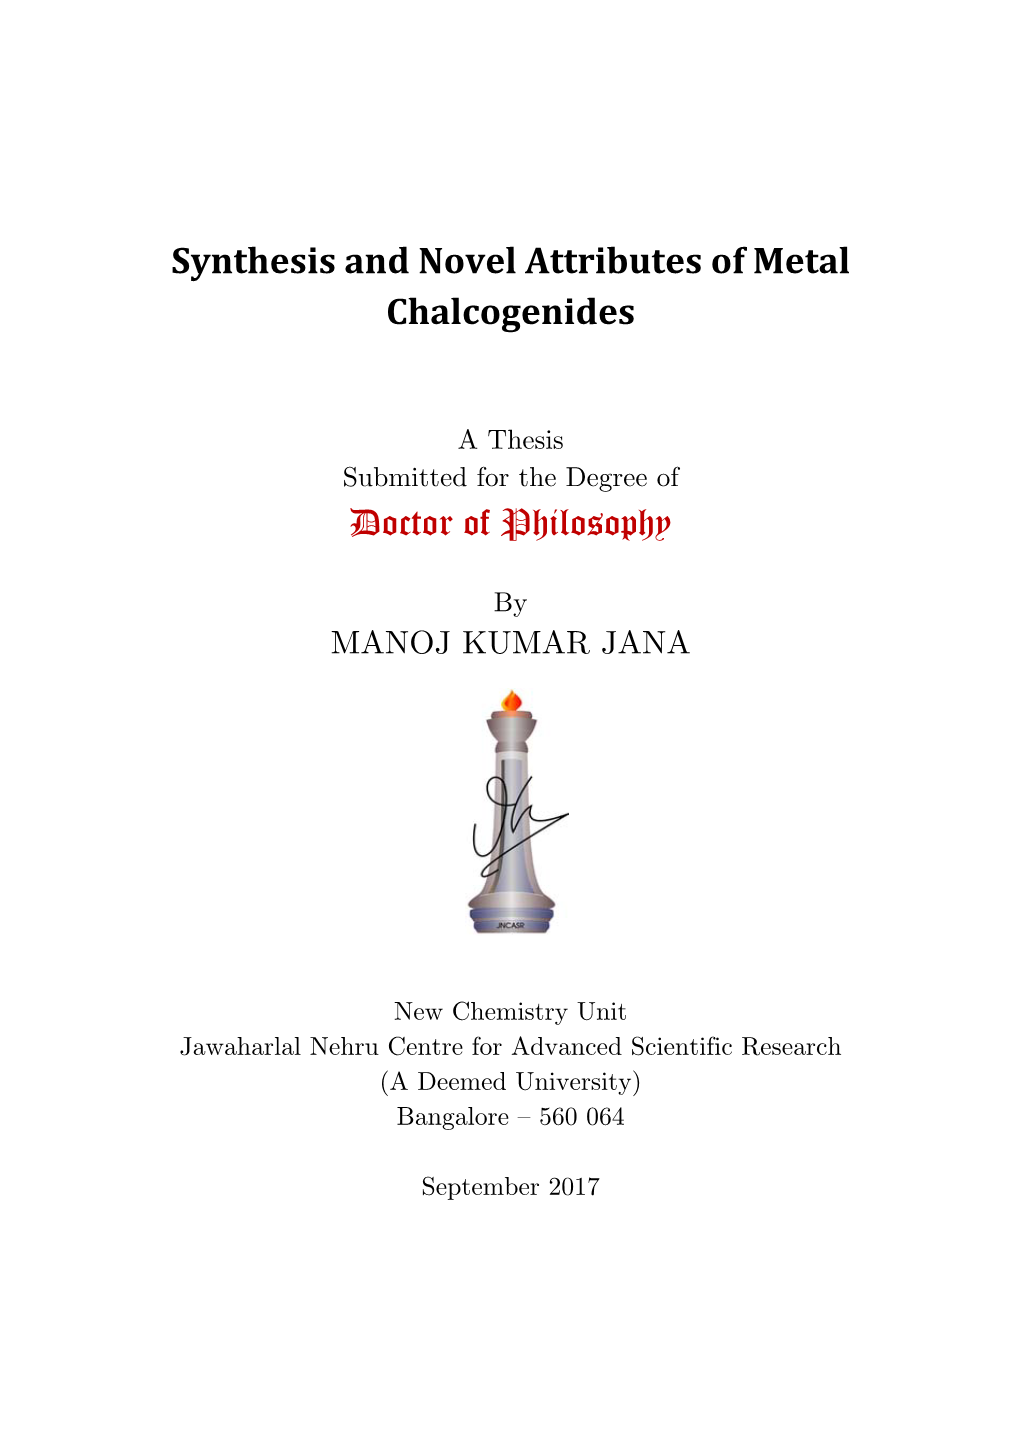 Synthesis and Novel Attributes of Metal Chalcogenides Doctor of Philosophy